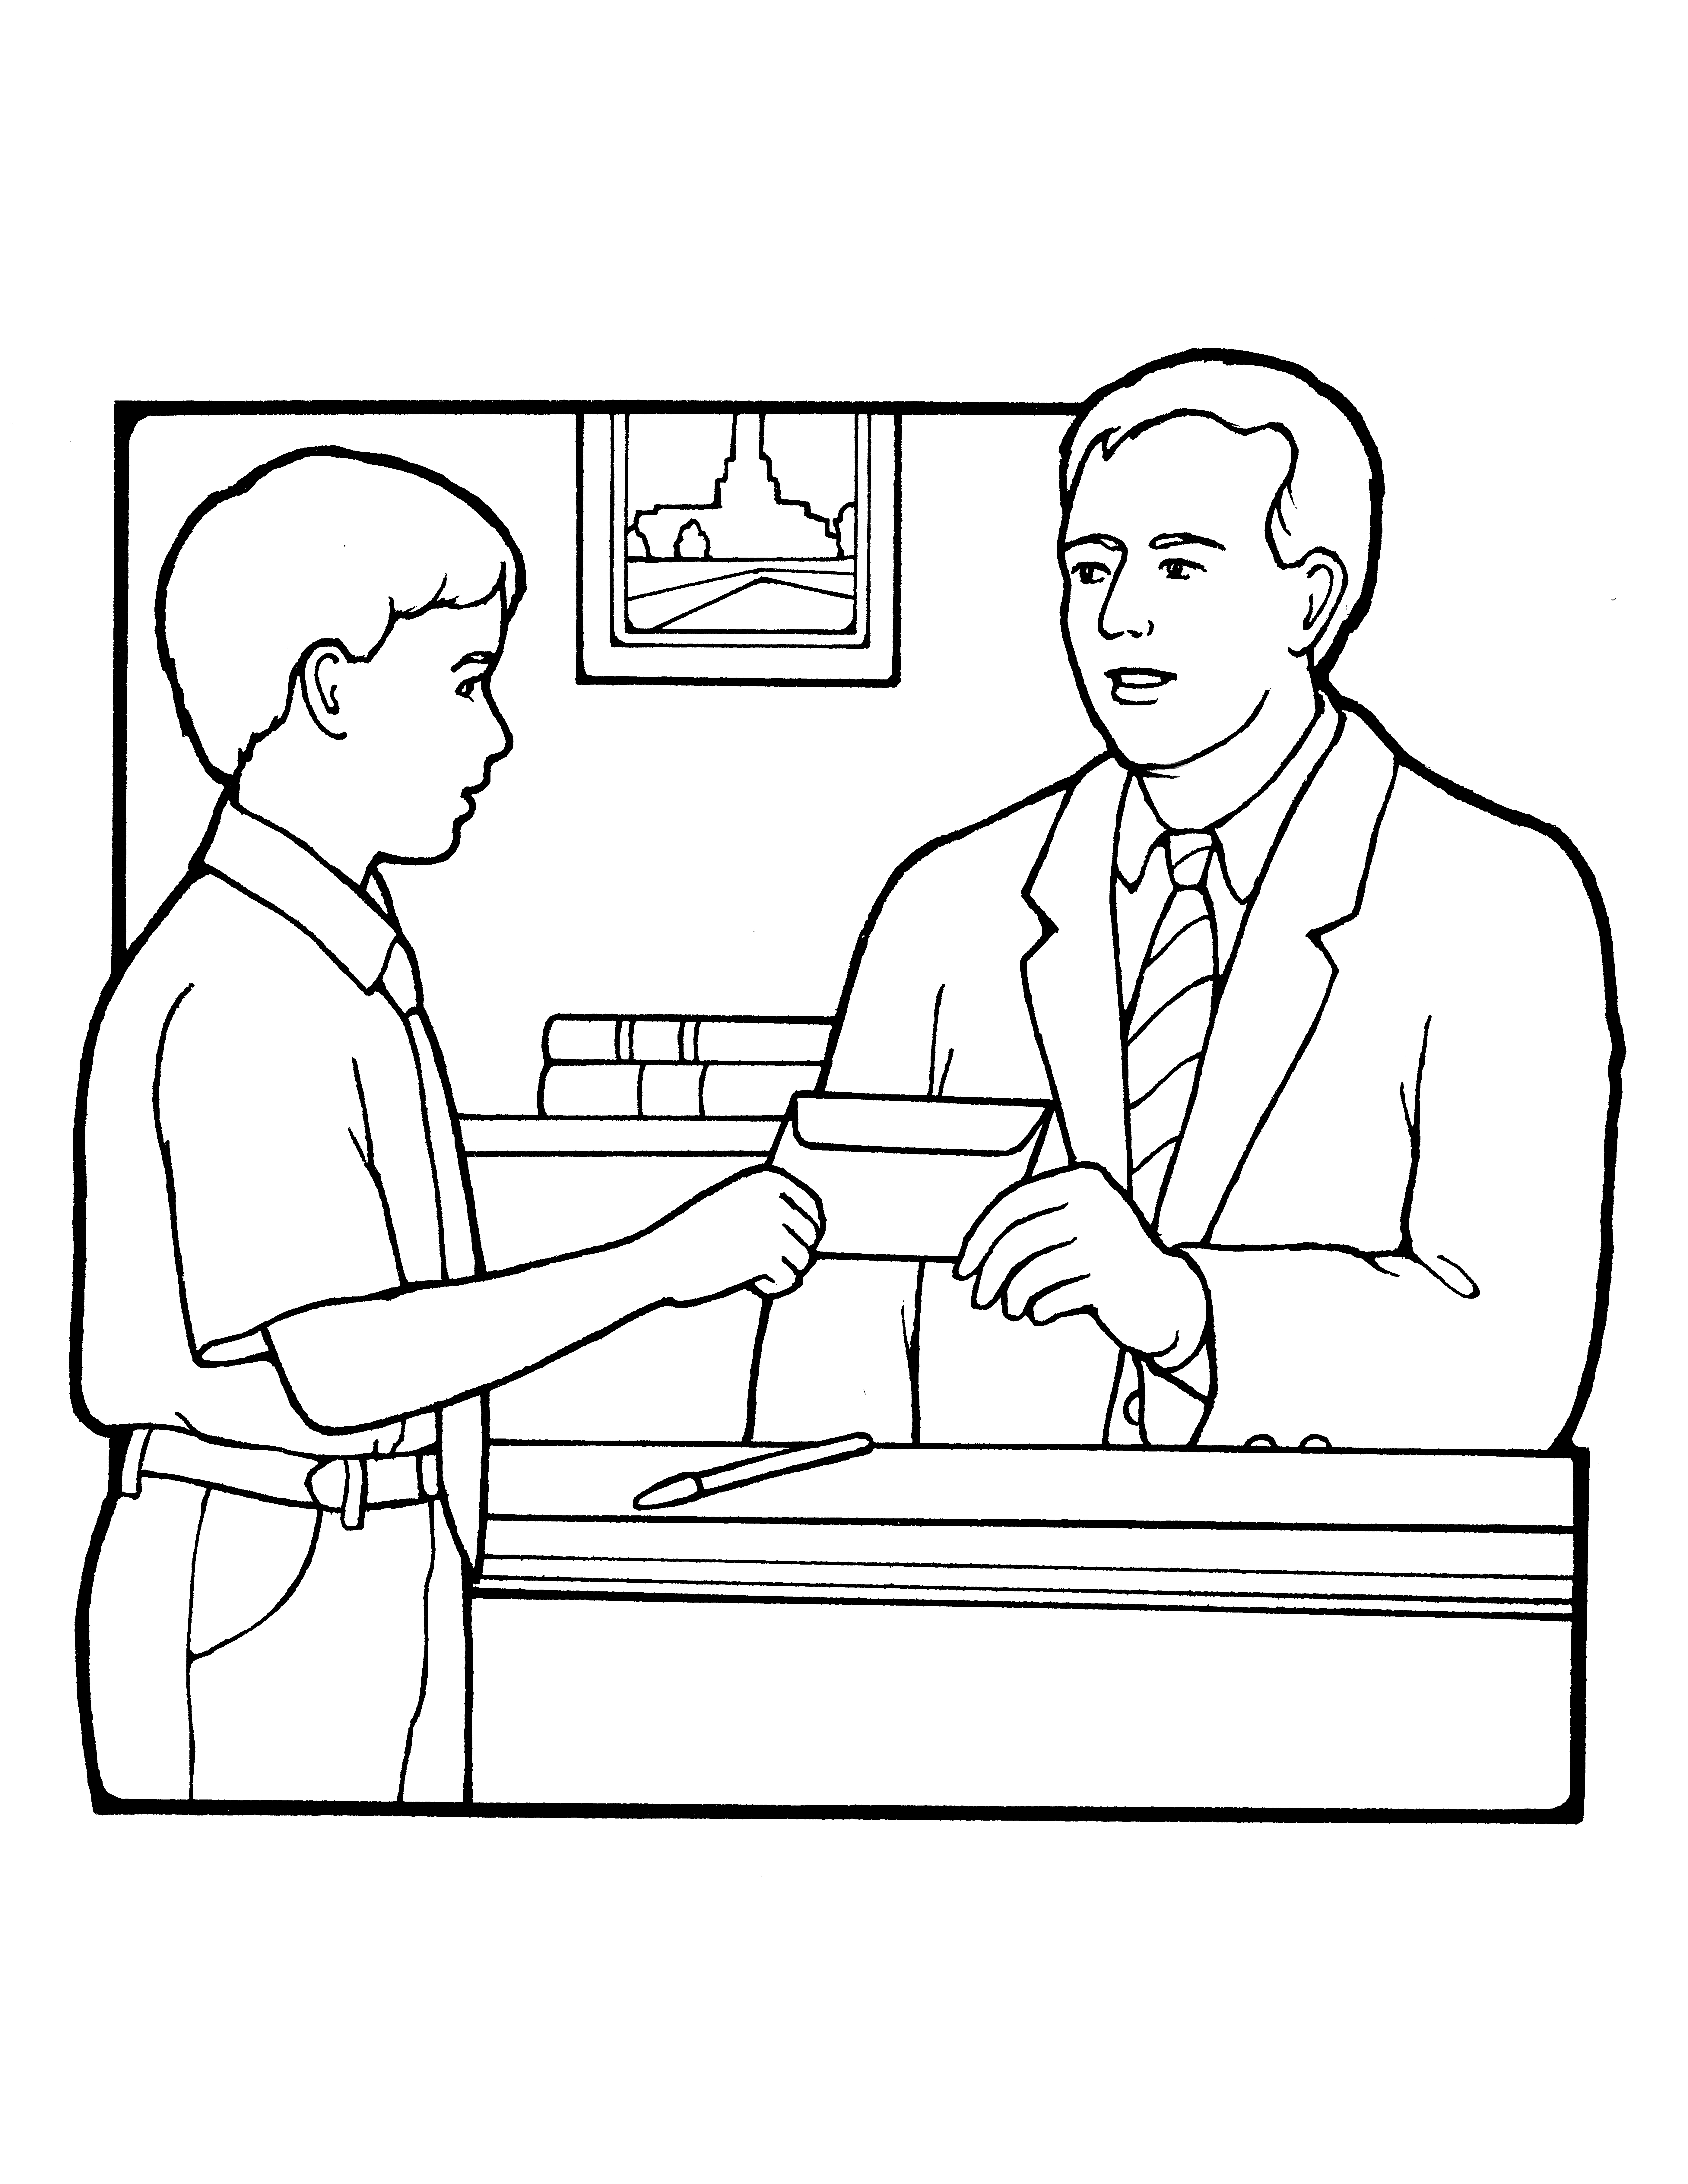 A black-and-white illustration of a young boy handing a tithing envelope to his bishop in the bishop's office.